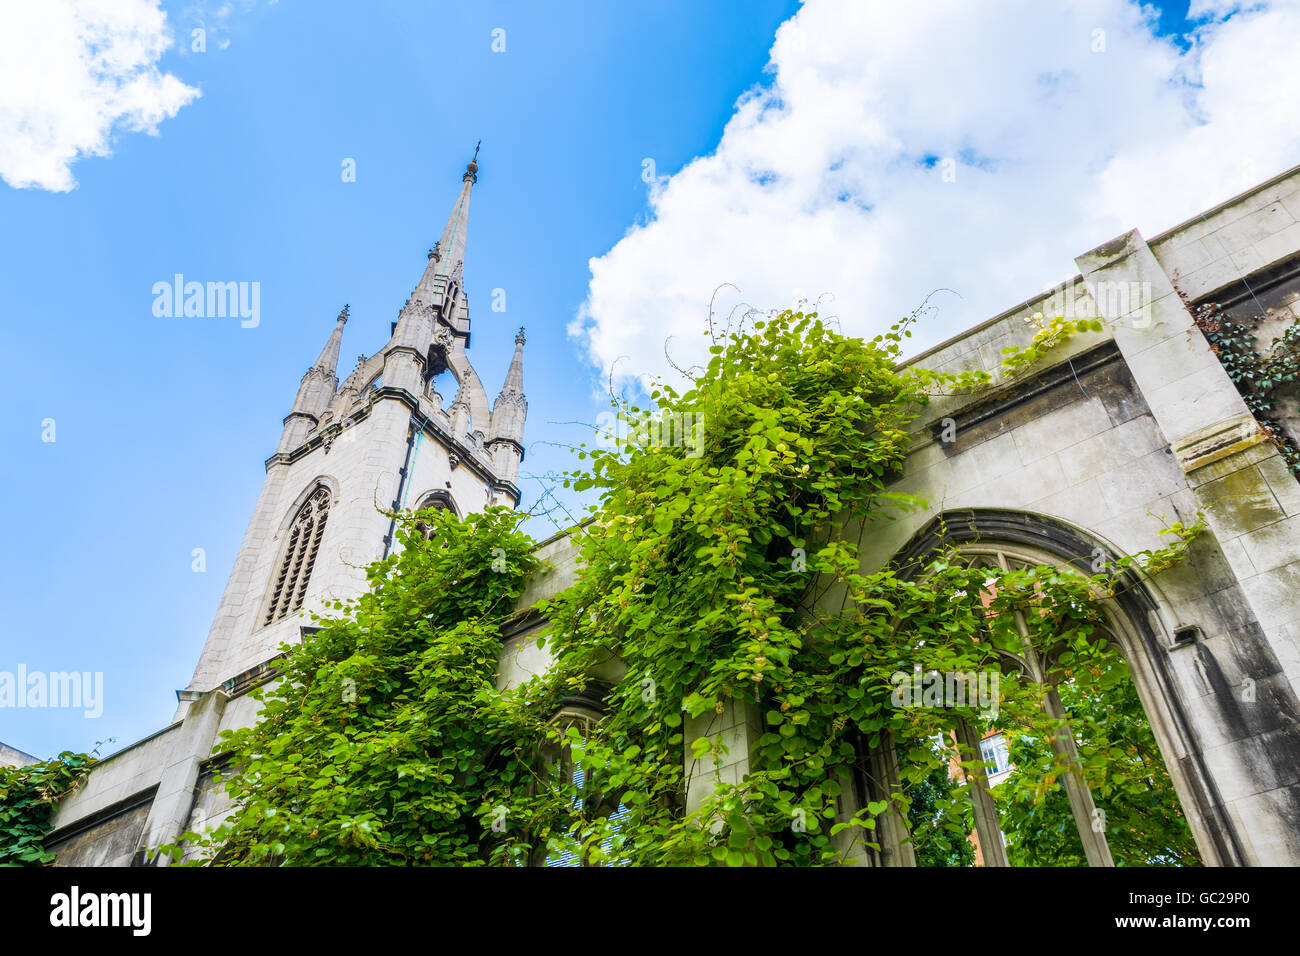 St. Dunstan-in-the-East, a church was largely destroyed in the Second World War and the ruins are now a public garden in London Stock Photo